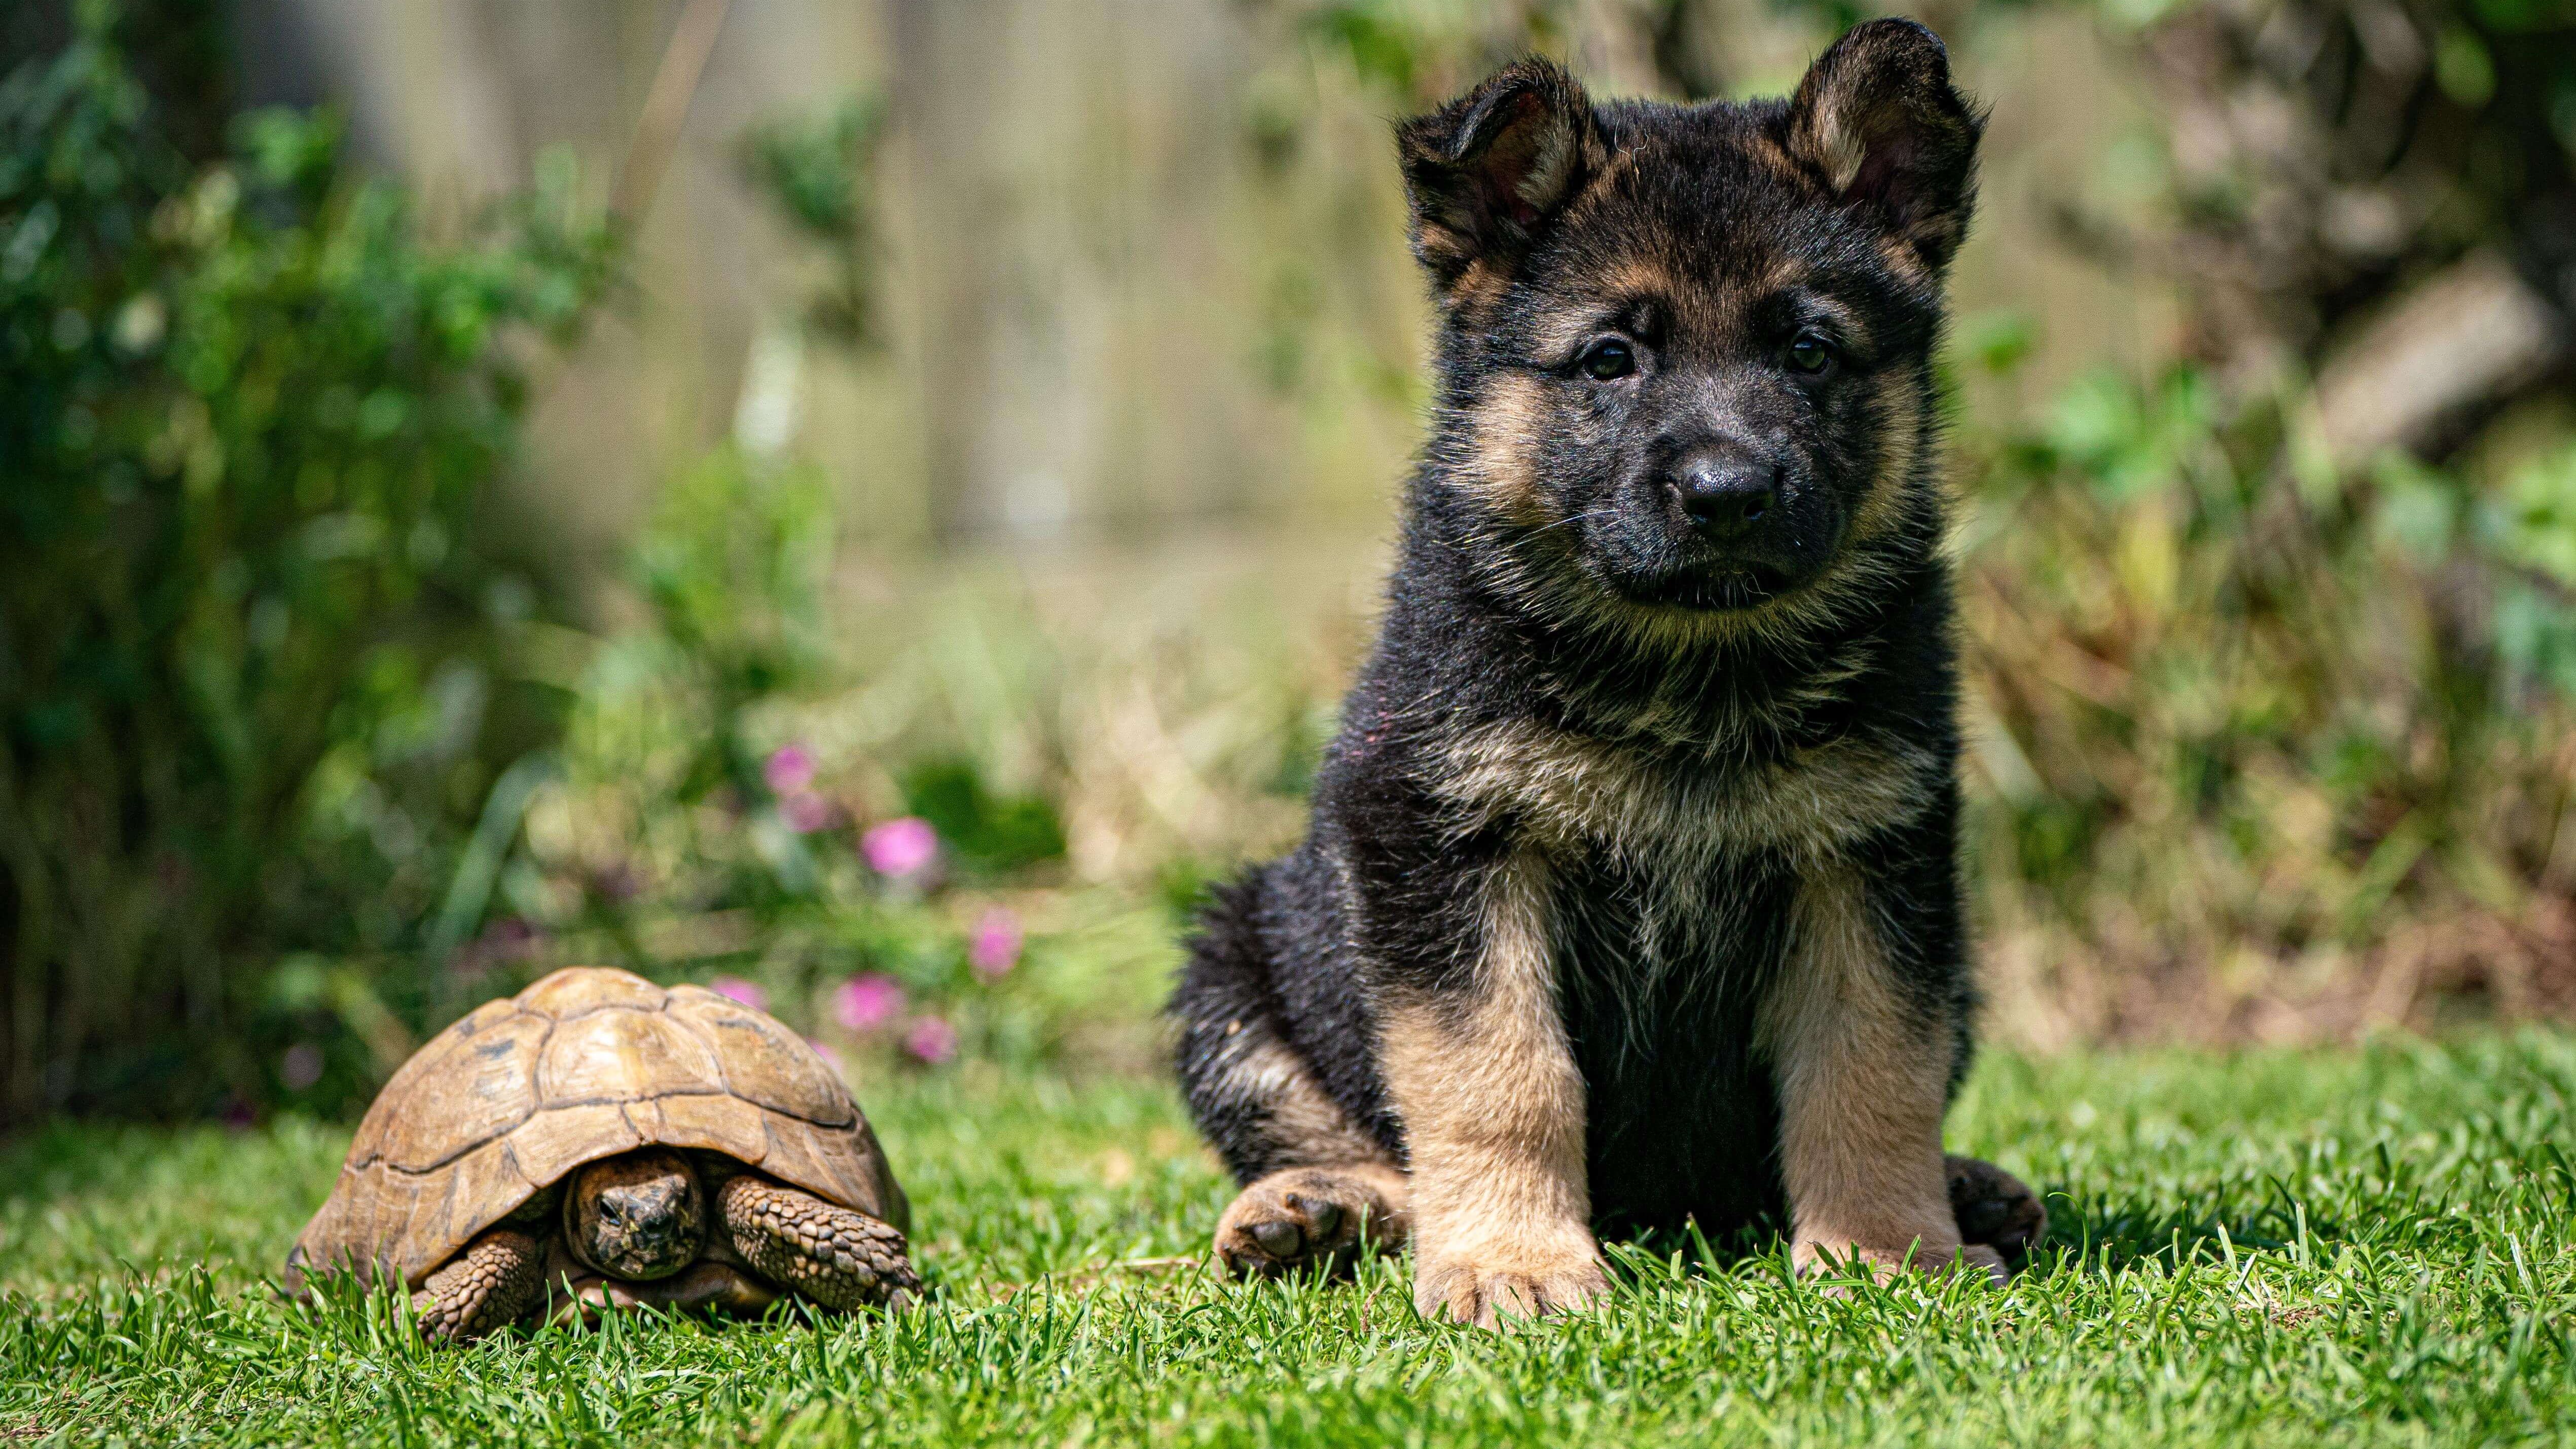 A six-week-old German shepherd puppy sits on a lawn next to a small brown tortoise